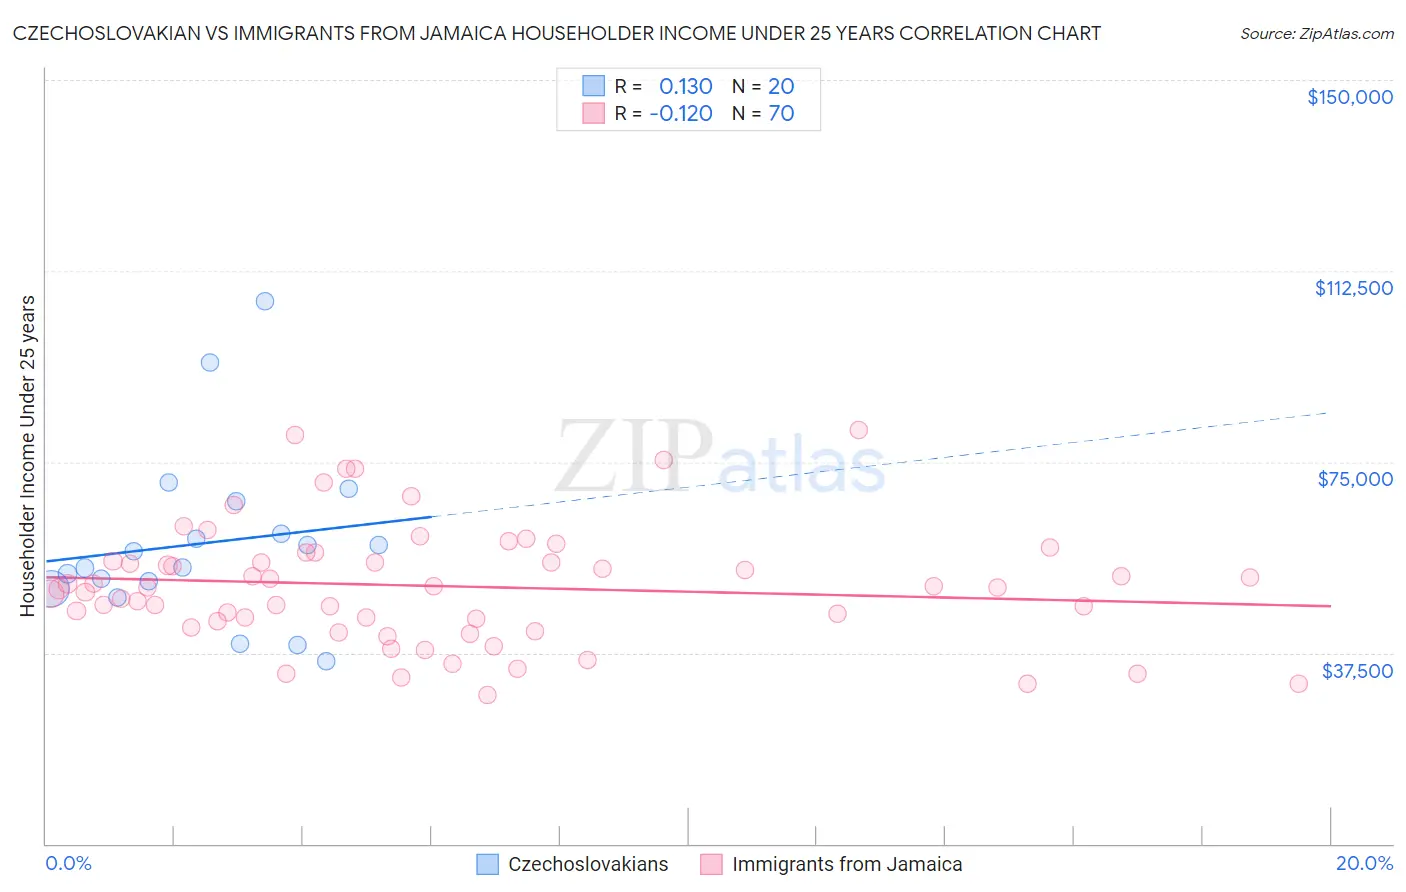 Czechoslovakian vs Immigrants from Jamaica Householder Income Under 25 years